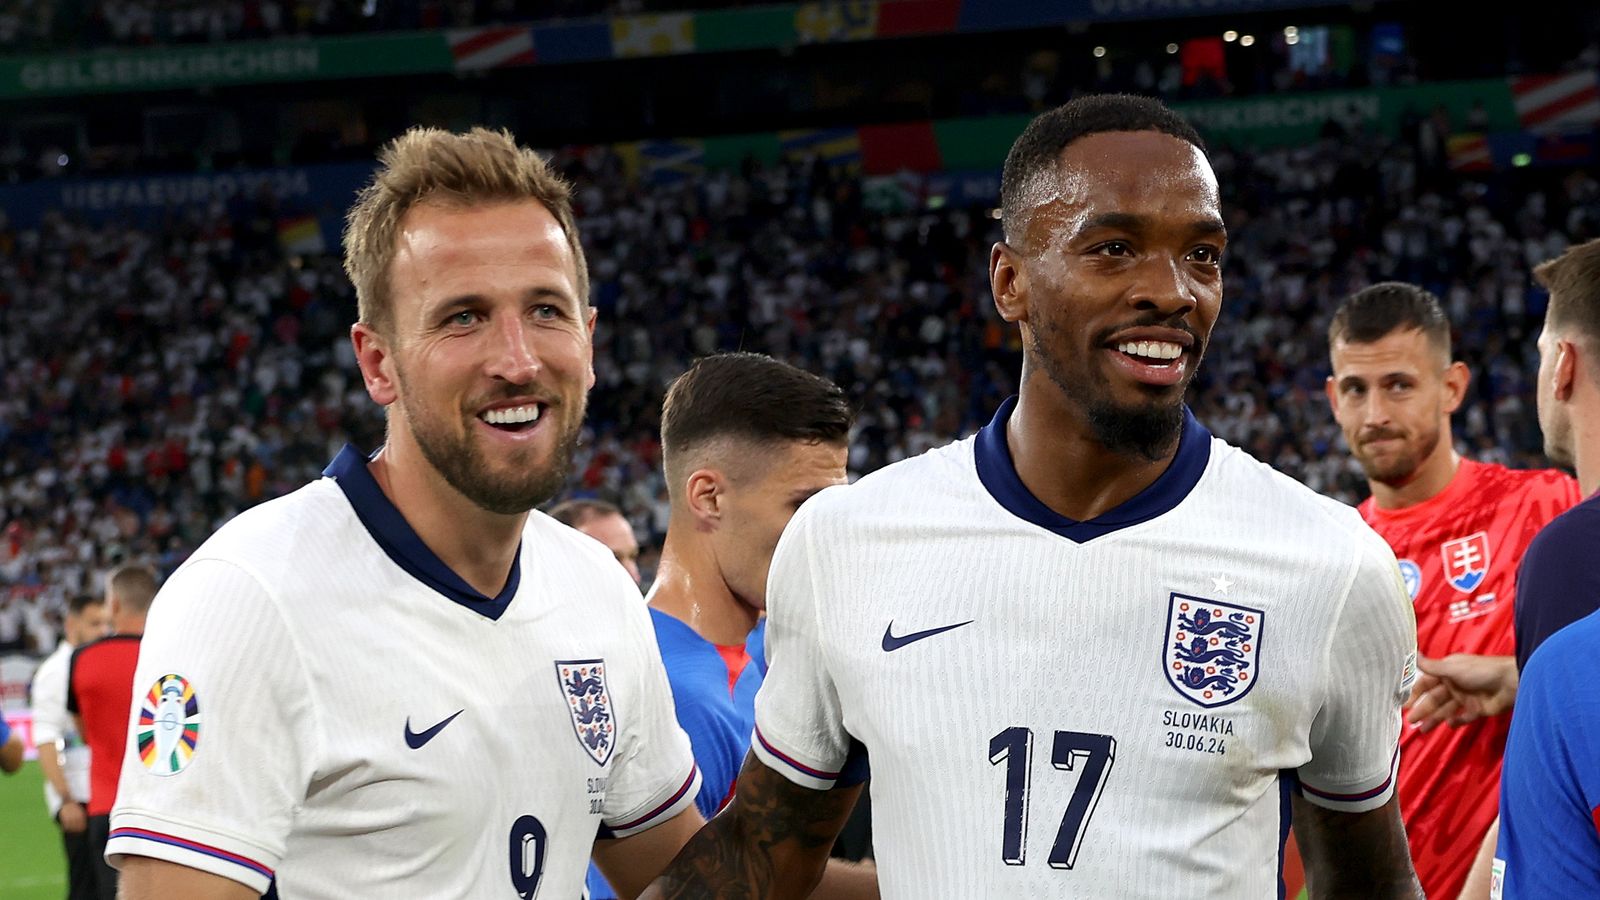 The England vs Slovakia rewatch - what did we learn? Ivan Toney shows Gareth Southgate the way to play